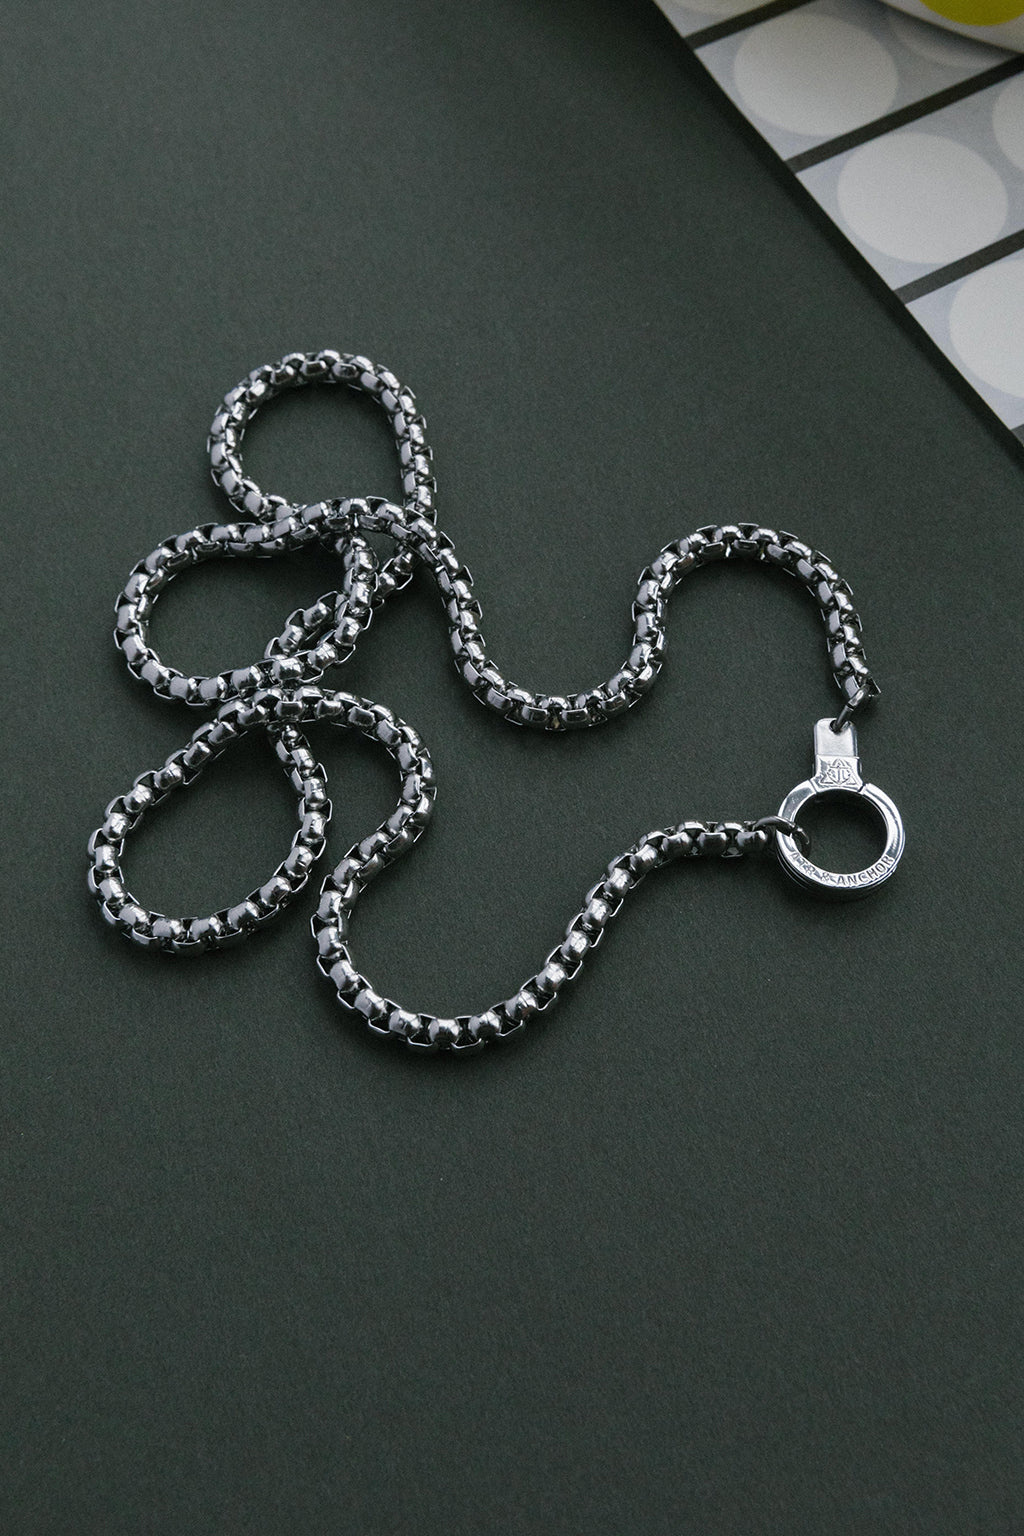 Stainless Steel Remain Grateful Rope Chain Necklace with Cuff Keeper – Air  & Anchor